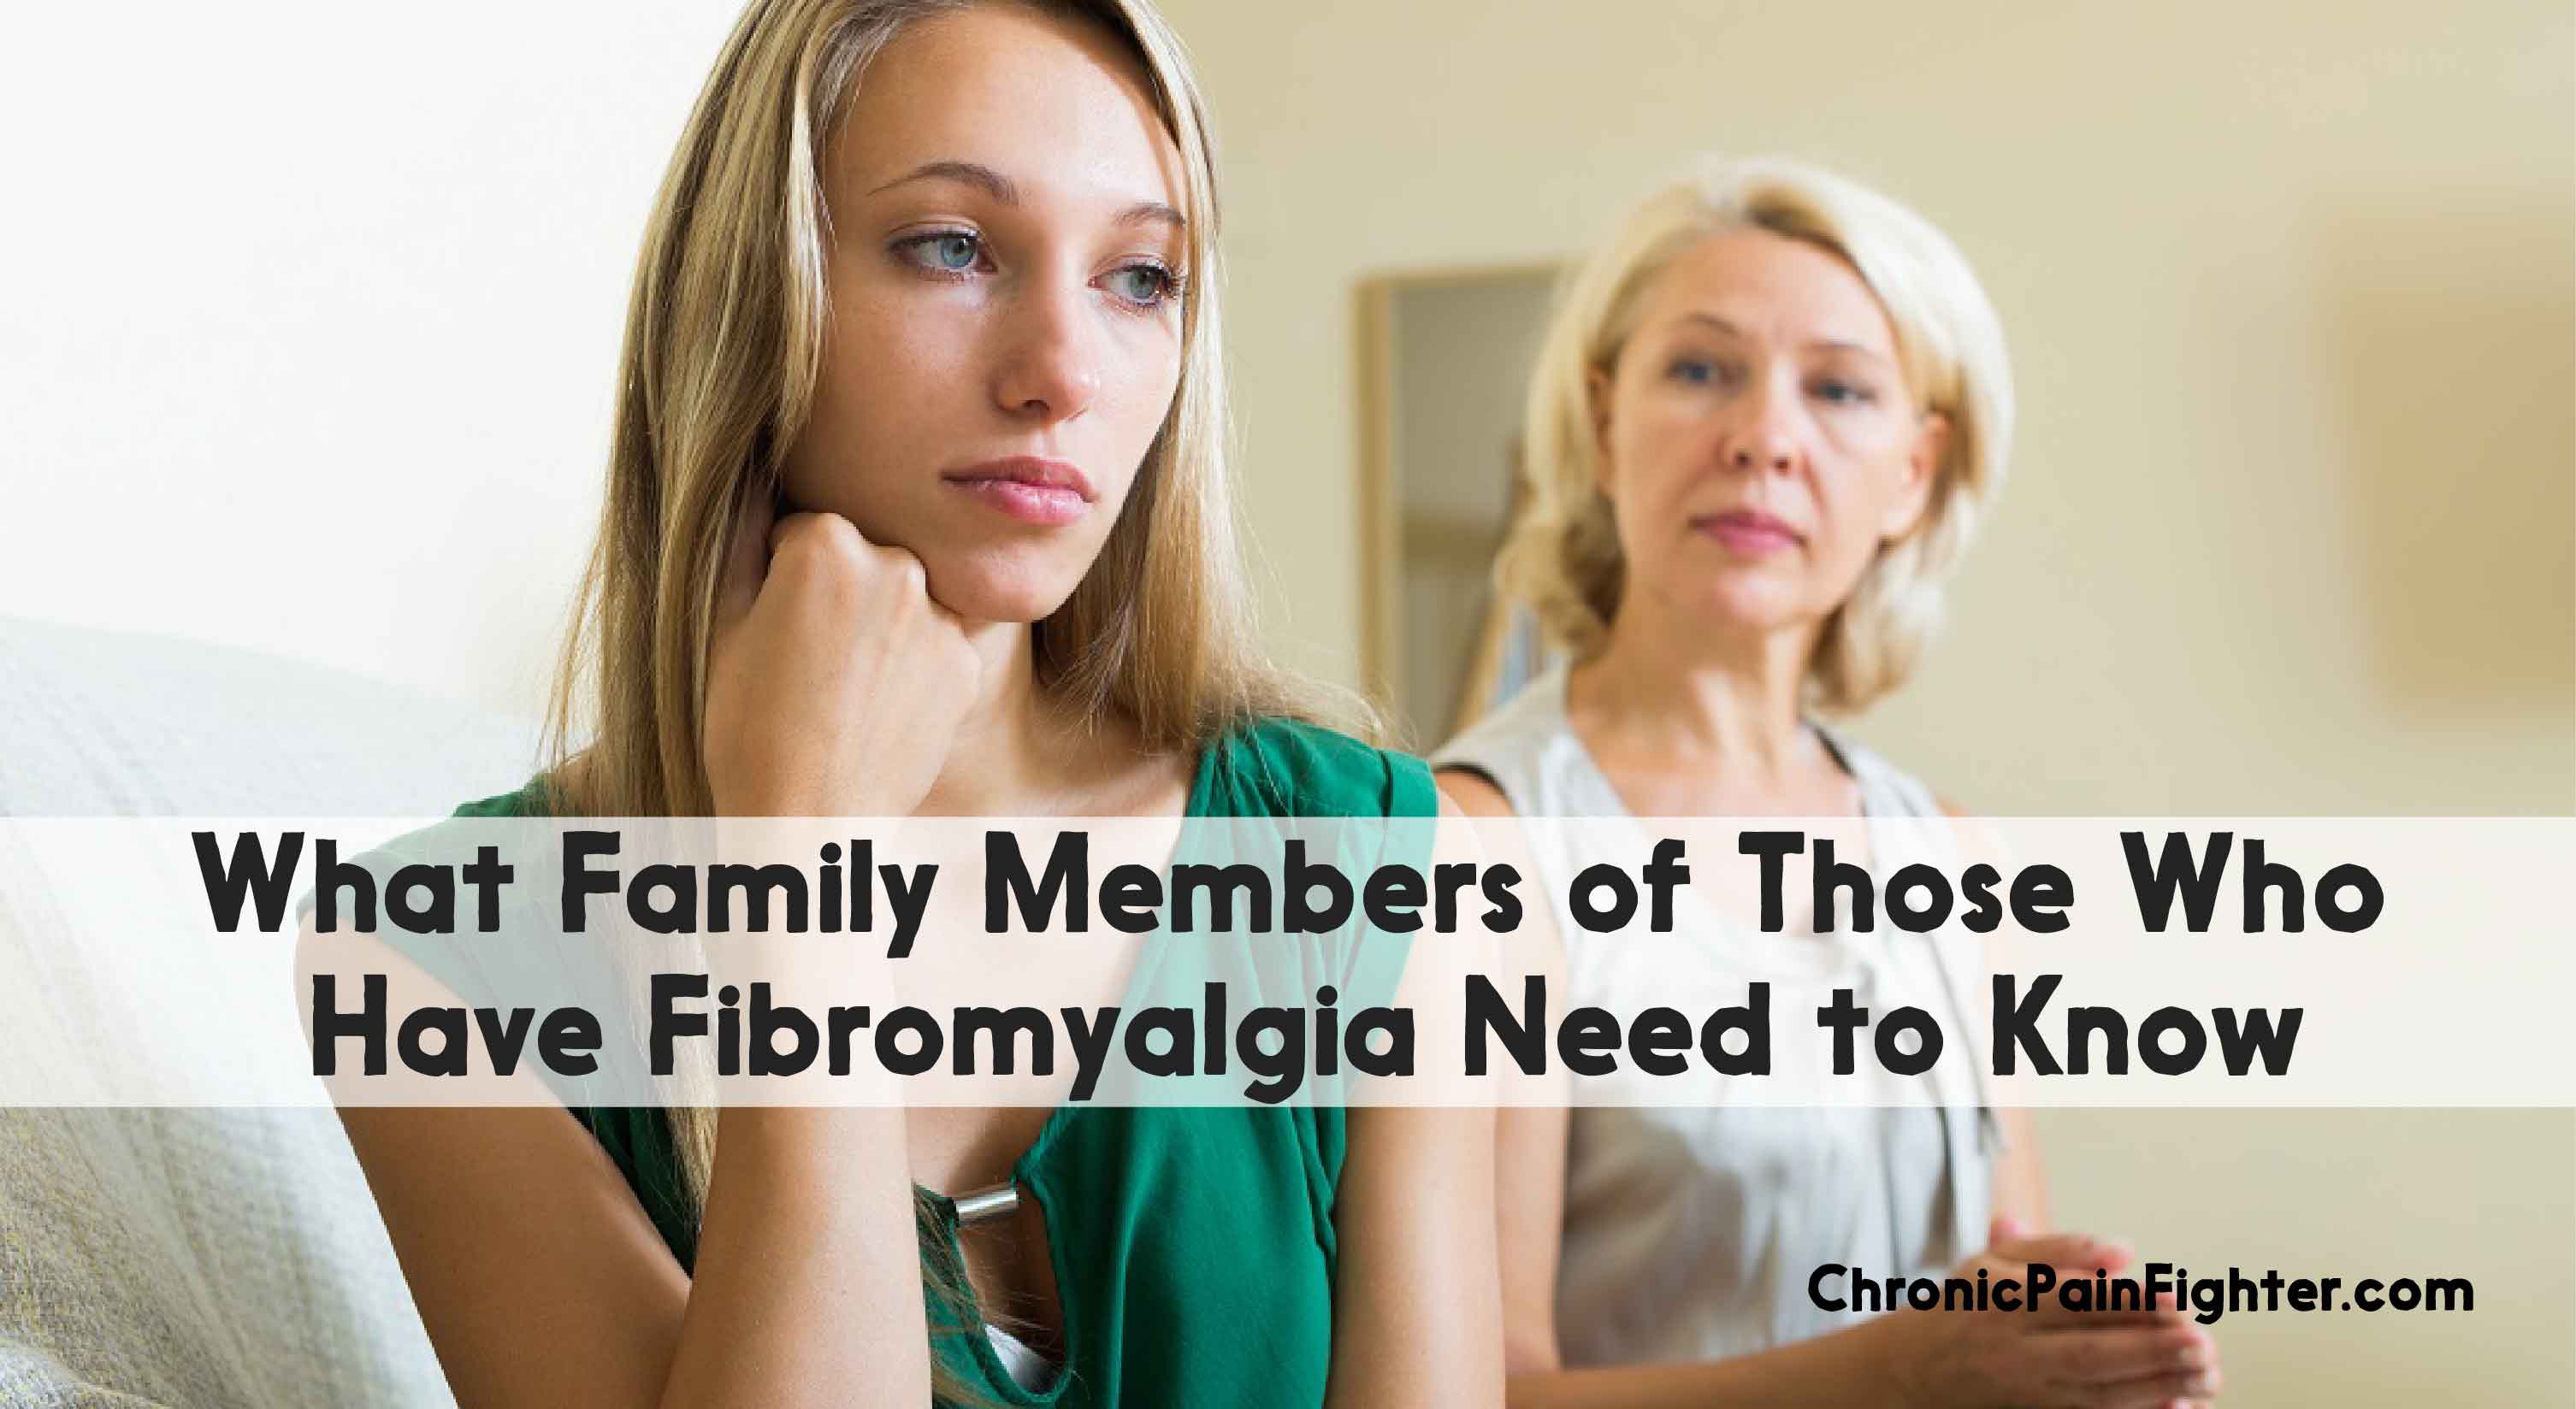 What family Members of Those who have Fibromyalgia Need to Know